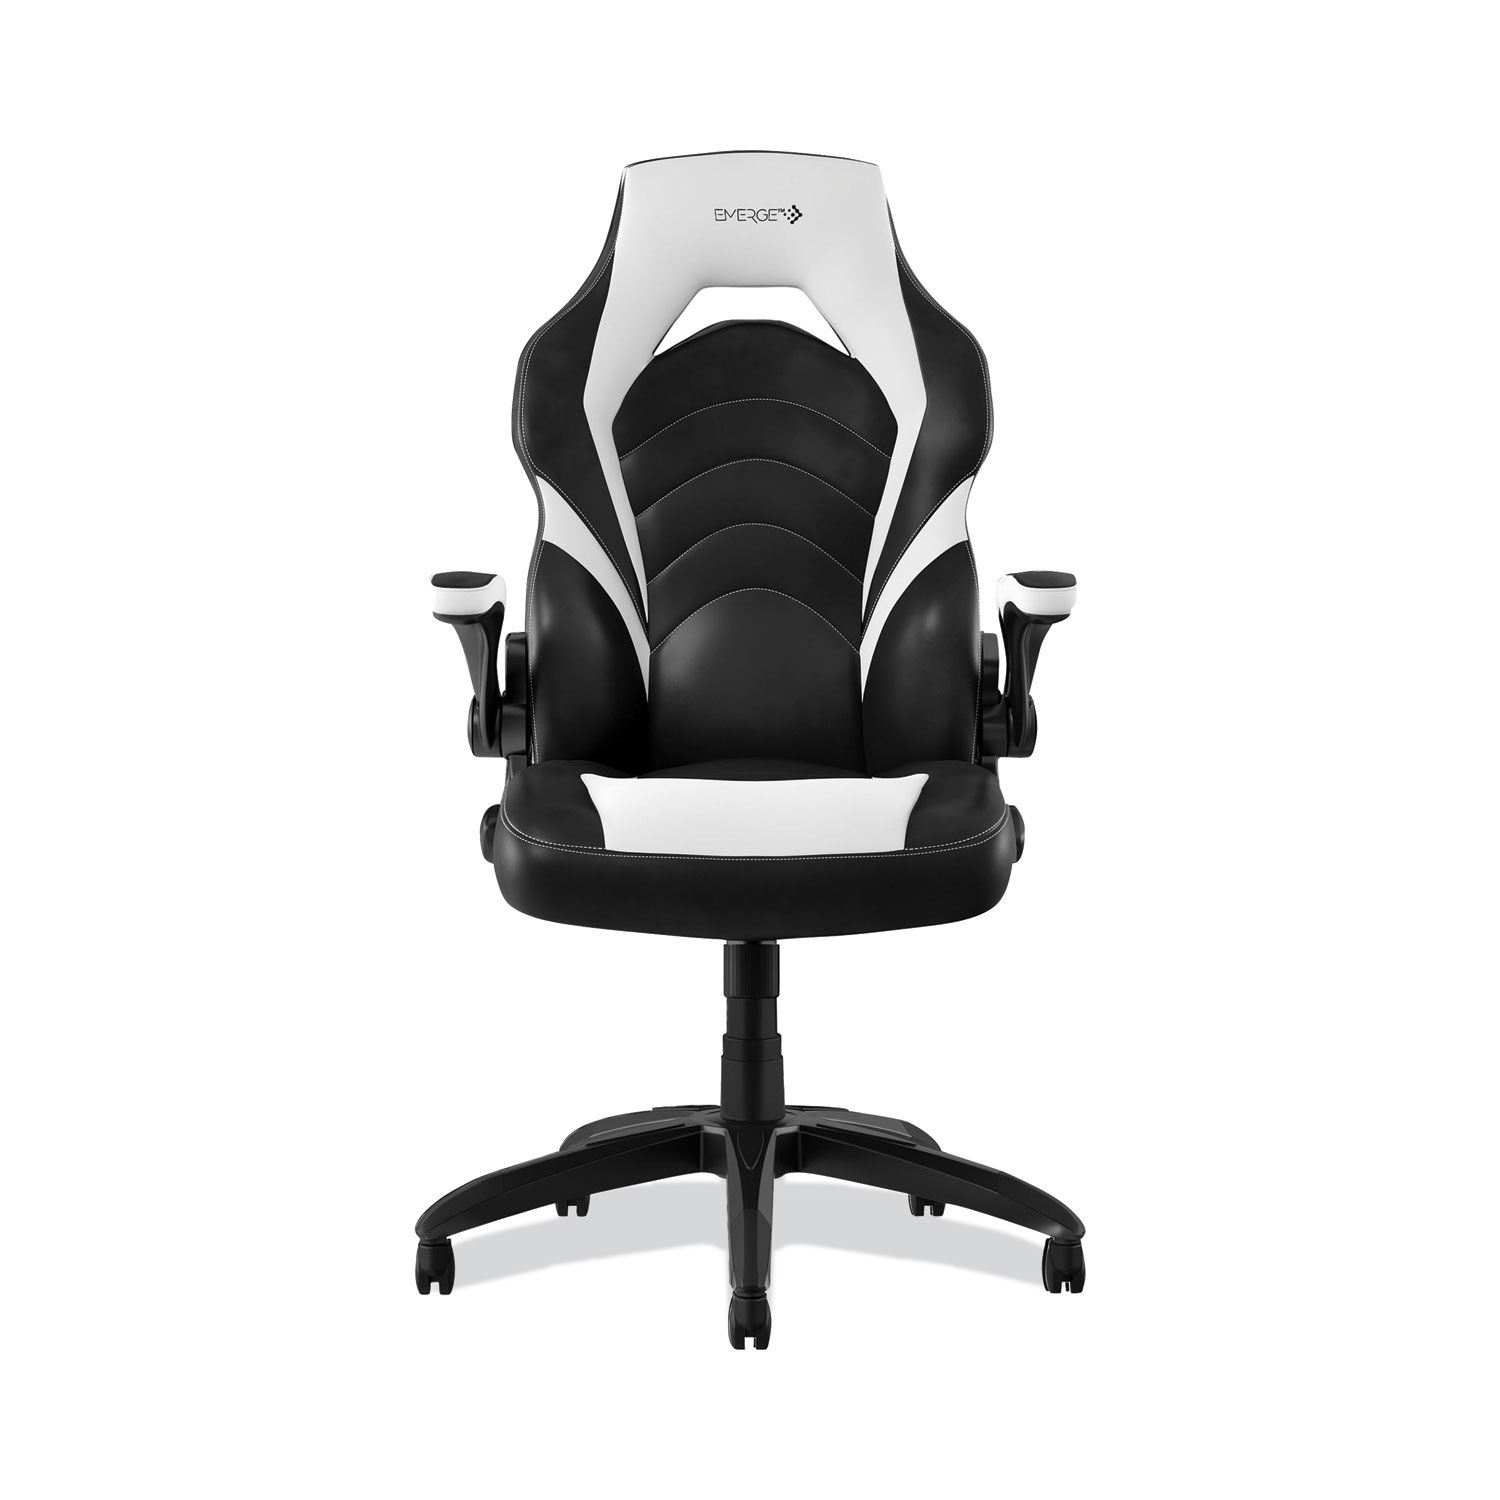 Vortex Bonded Leather Gaming Chair Supports Up to 301 lbs, 17.9" to 21.6" Seat Height, White/Black Back, Black Base